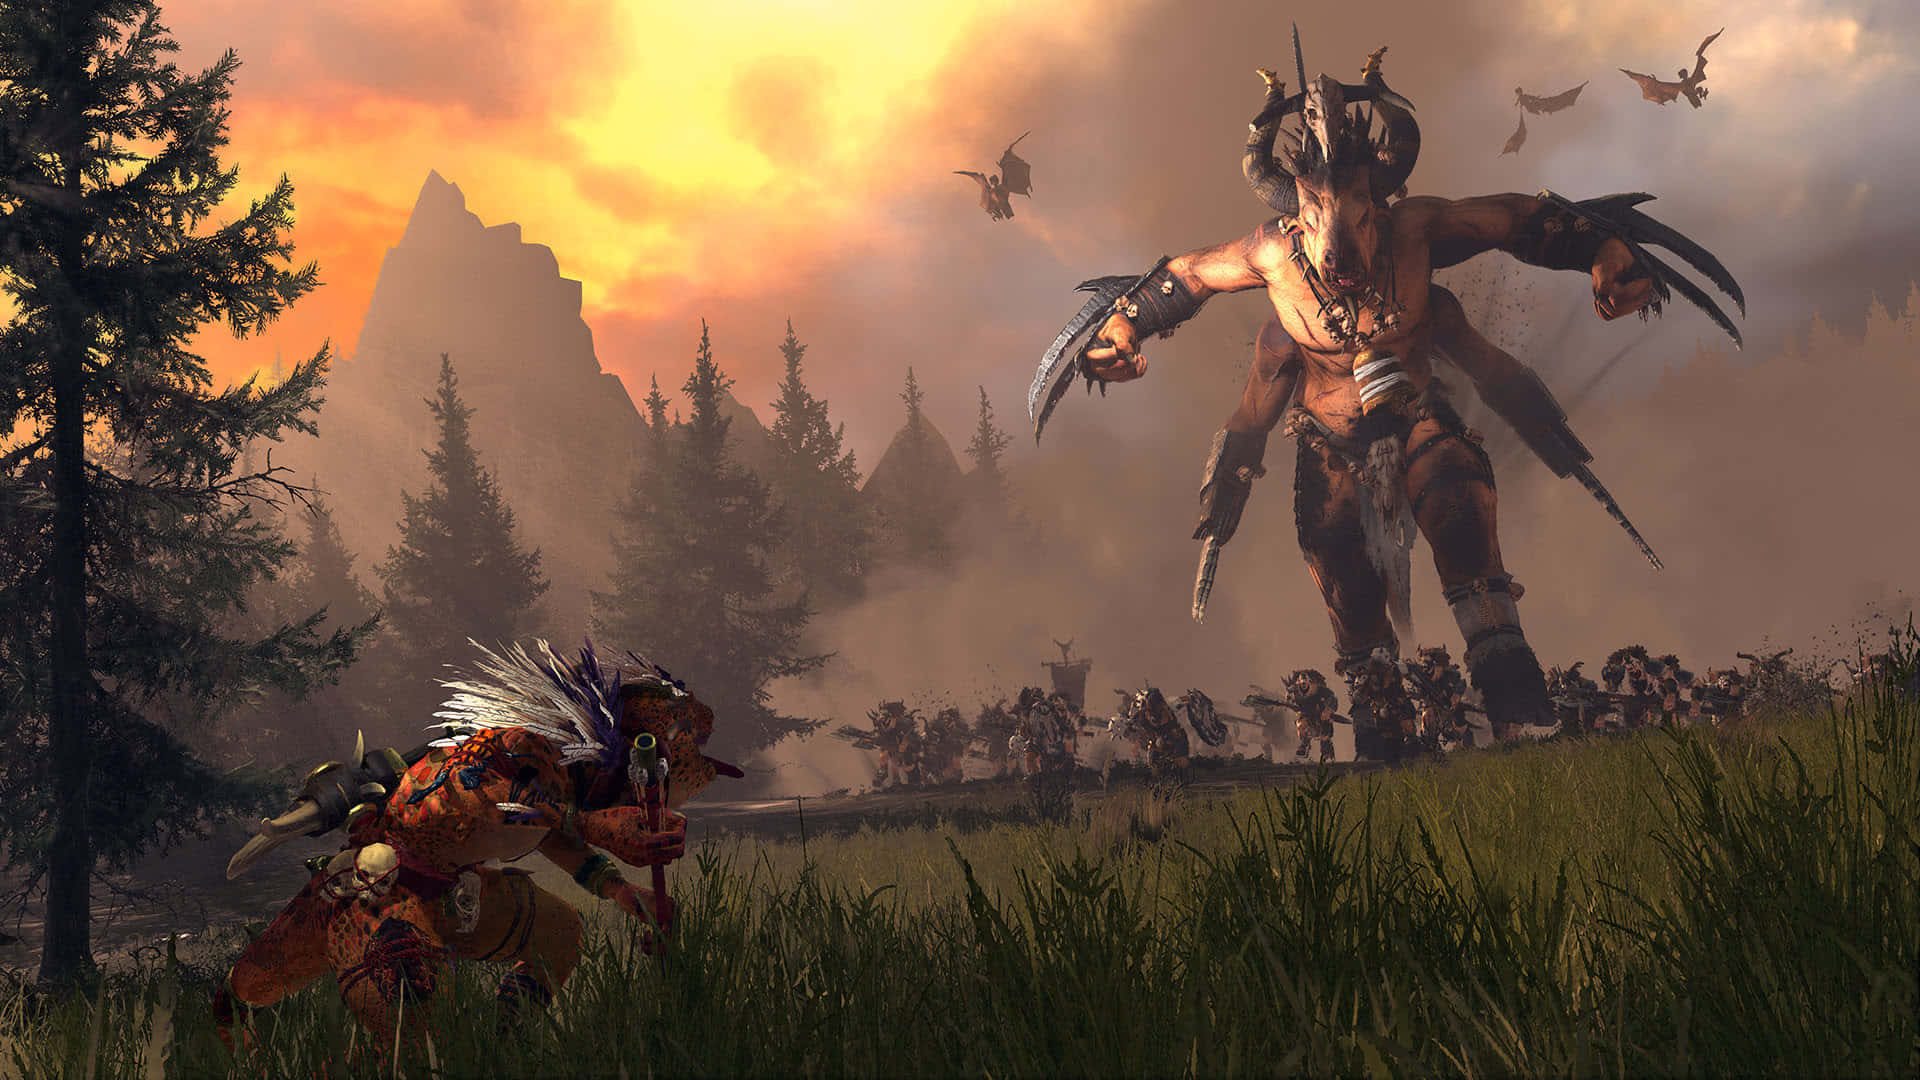 A Screenshot Of A Game With A Large Monster In The Background